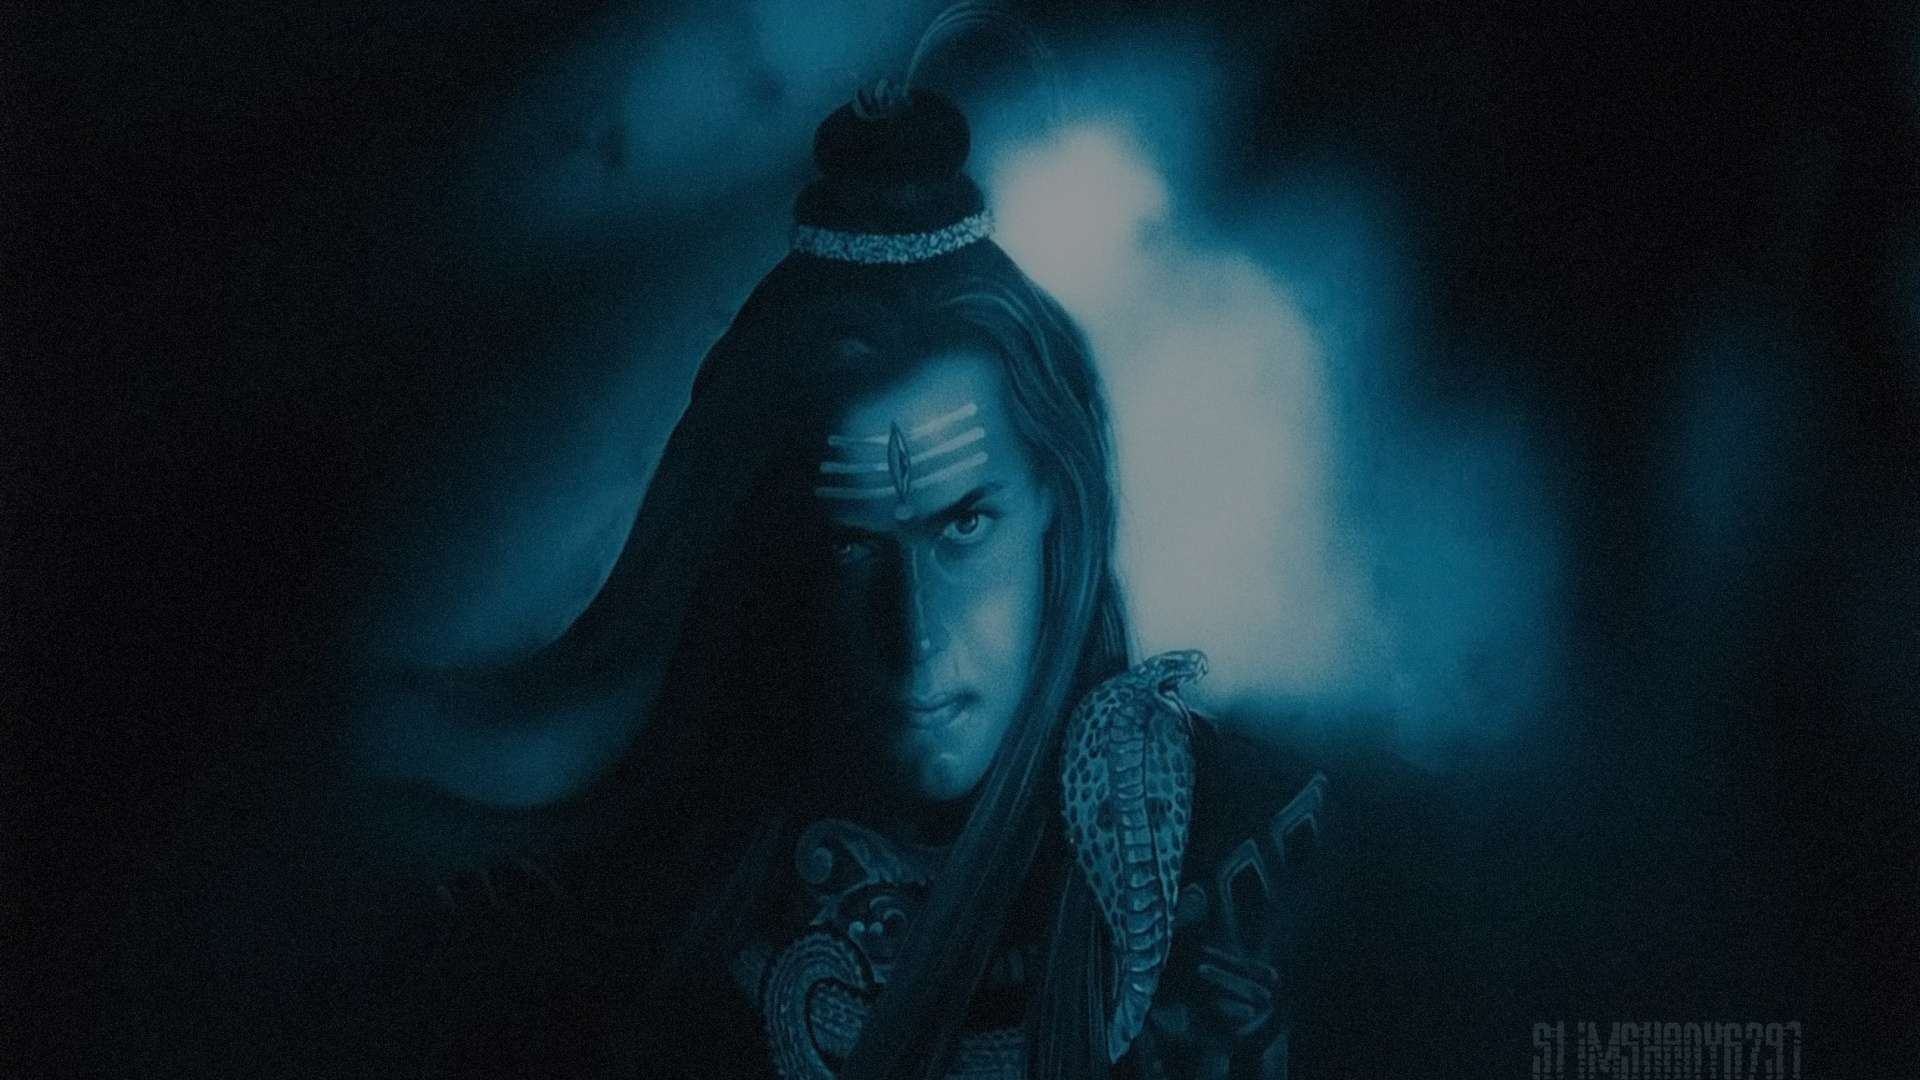 IMAGE angry lord shiva hd wallpapers